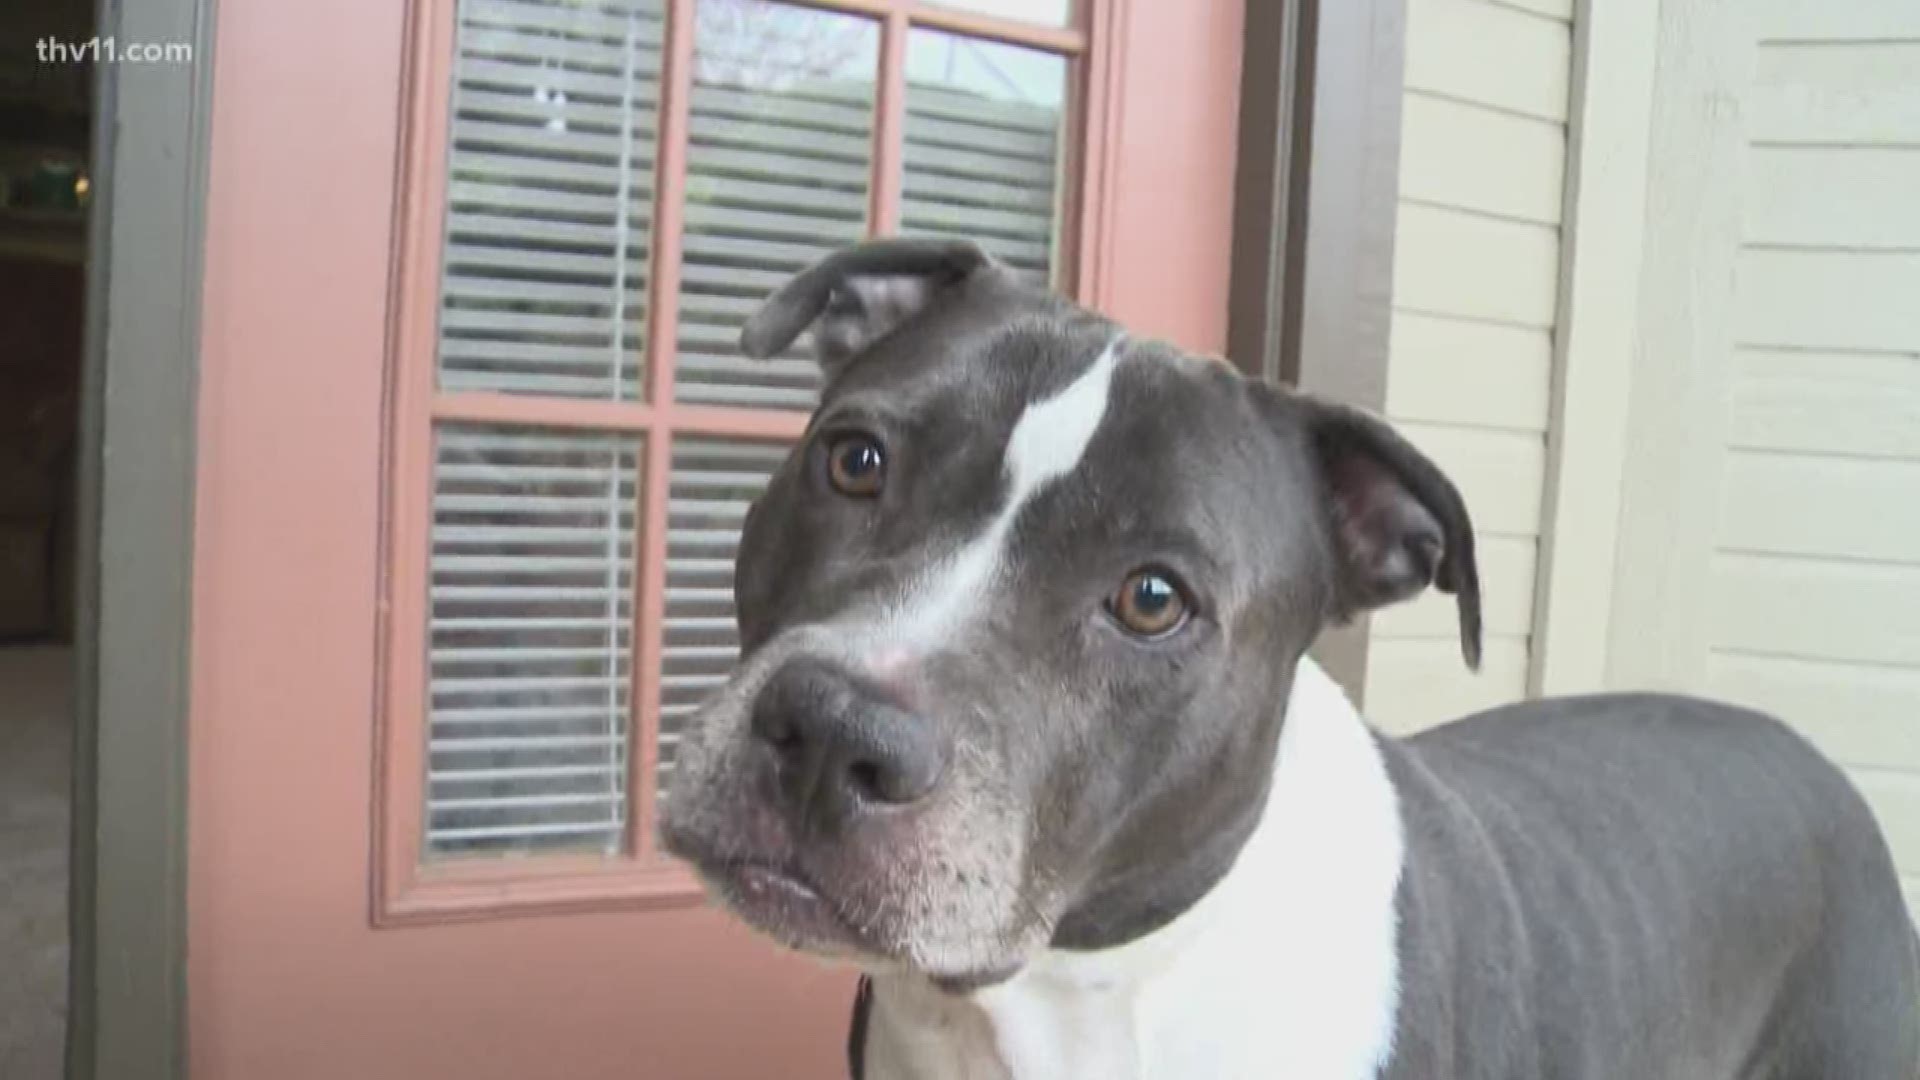 North Little Rock City Council members will hear from people looking to reverse the city's ban on pit bulls.